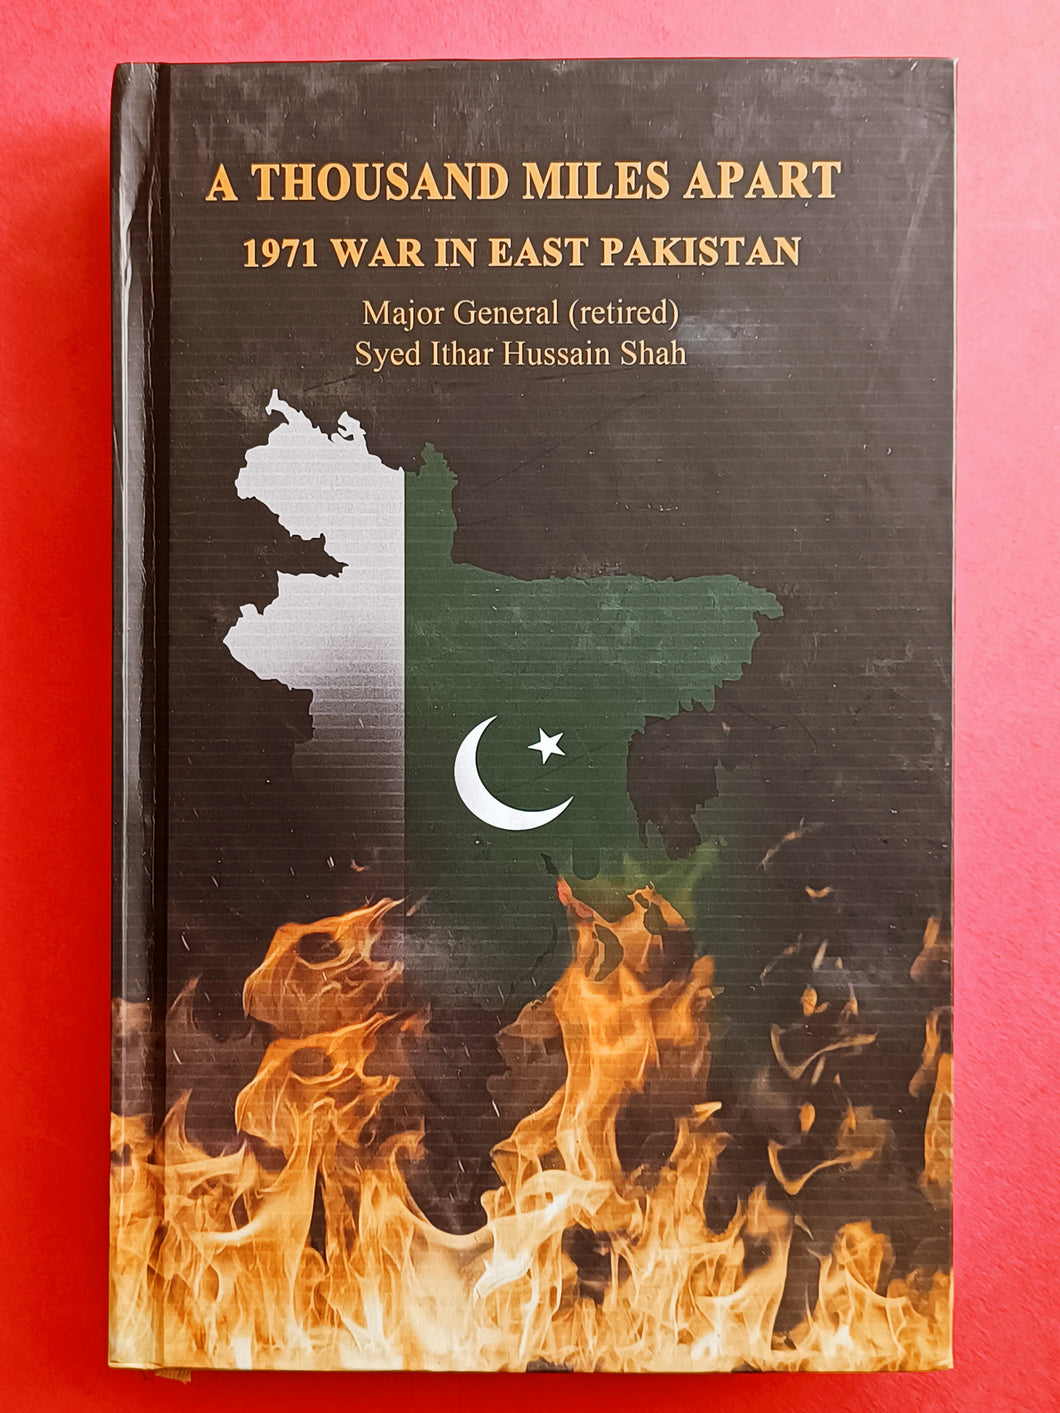 A Thousand Miles Apart: 1971 War in East Pakistan